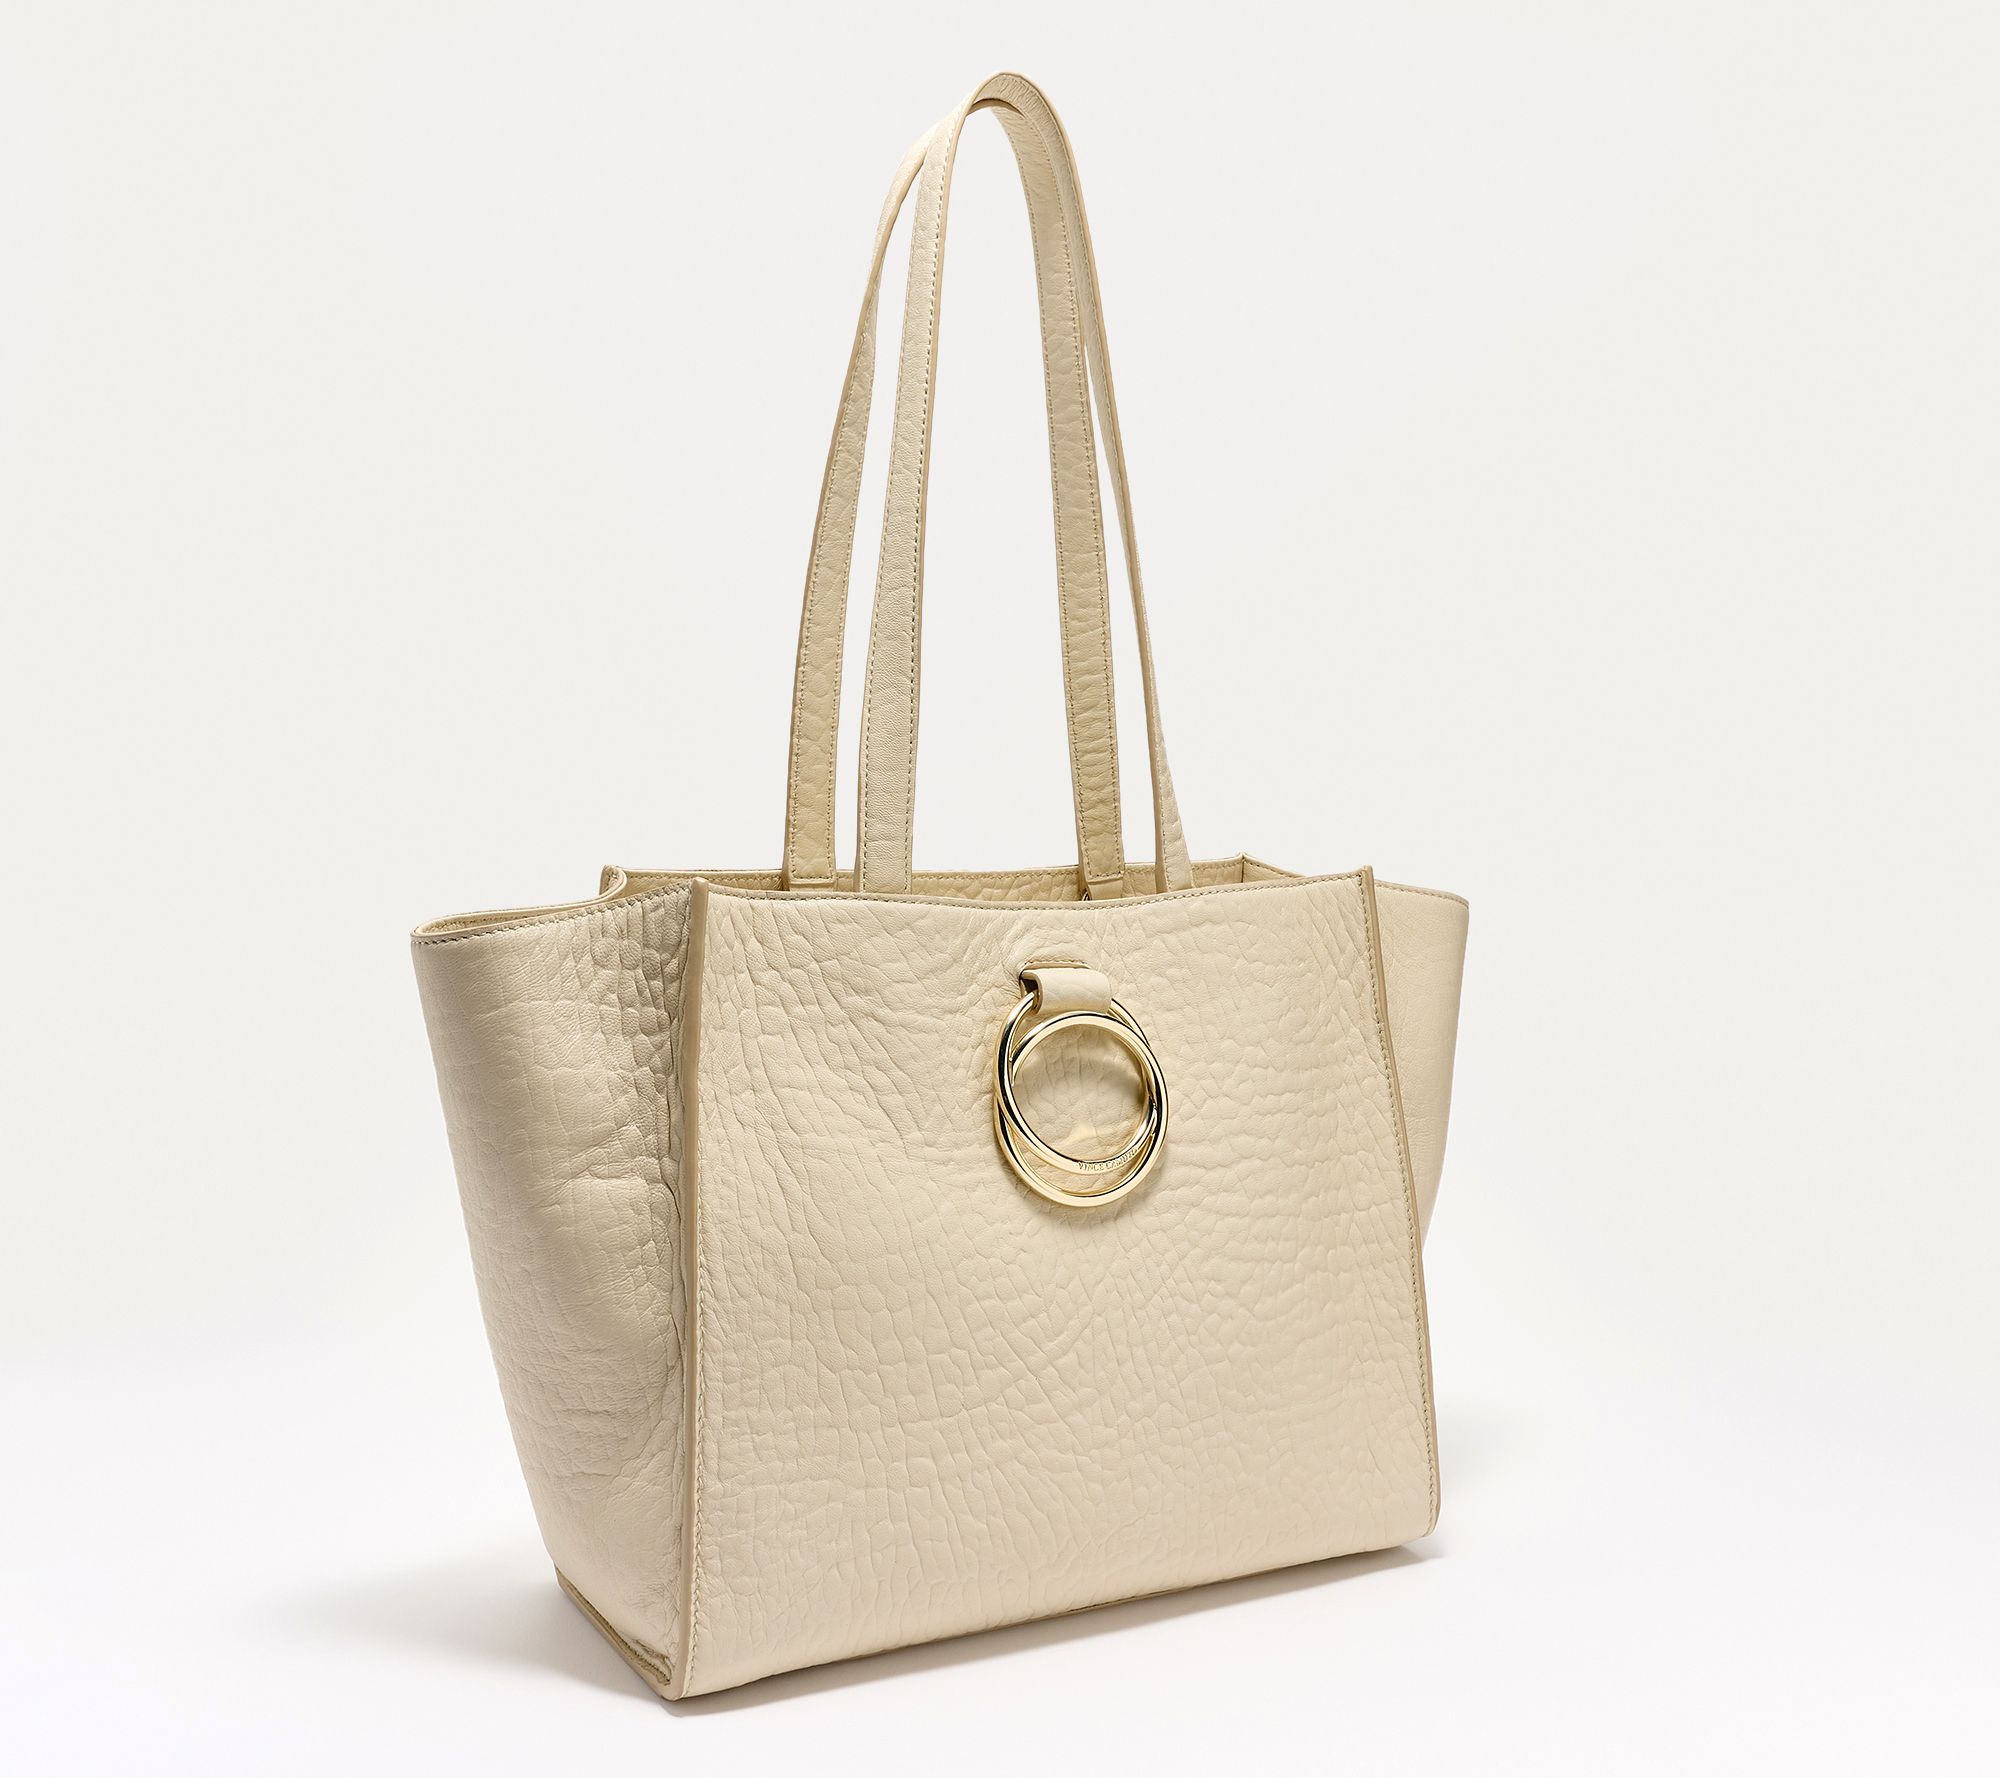 Kate Spade 24-Hour Flash Deal: Get This $300 Tote Bag for Just $69